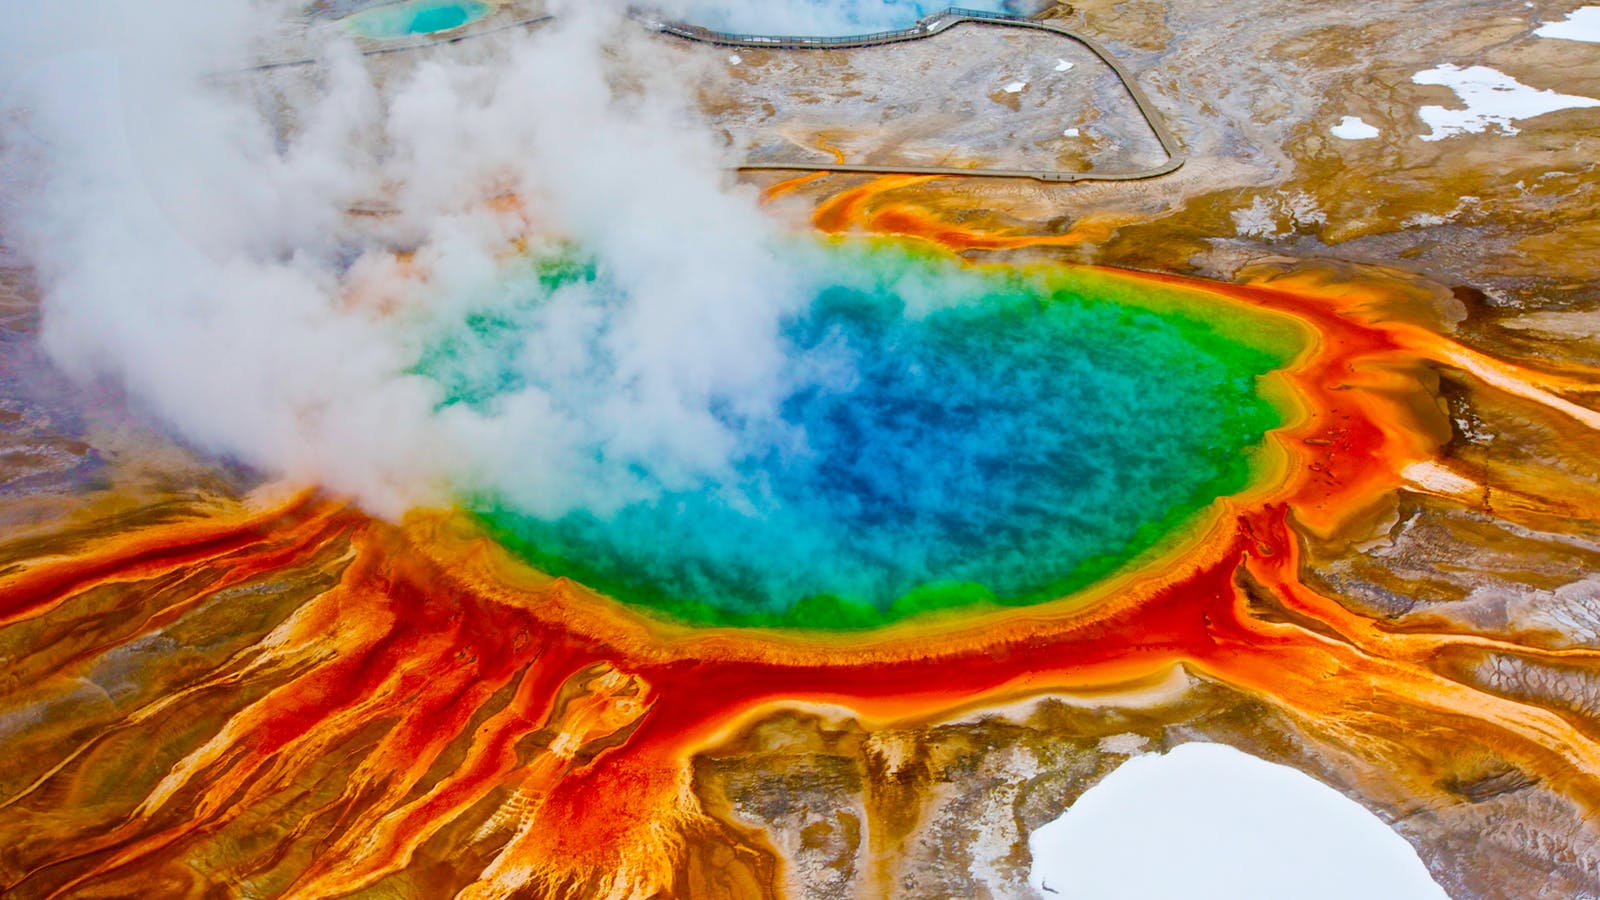 Yellowstone Supervolcano Shows An Alarmingly Risk Of Hydrothermal Eruption